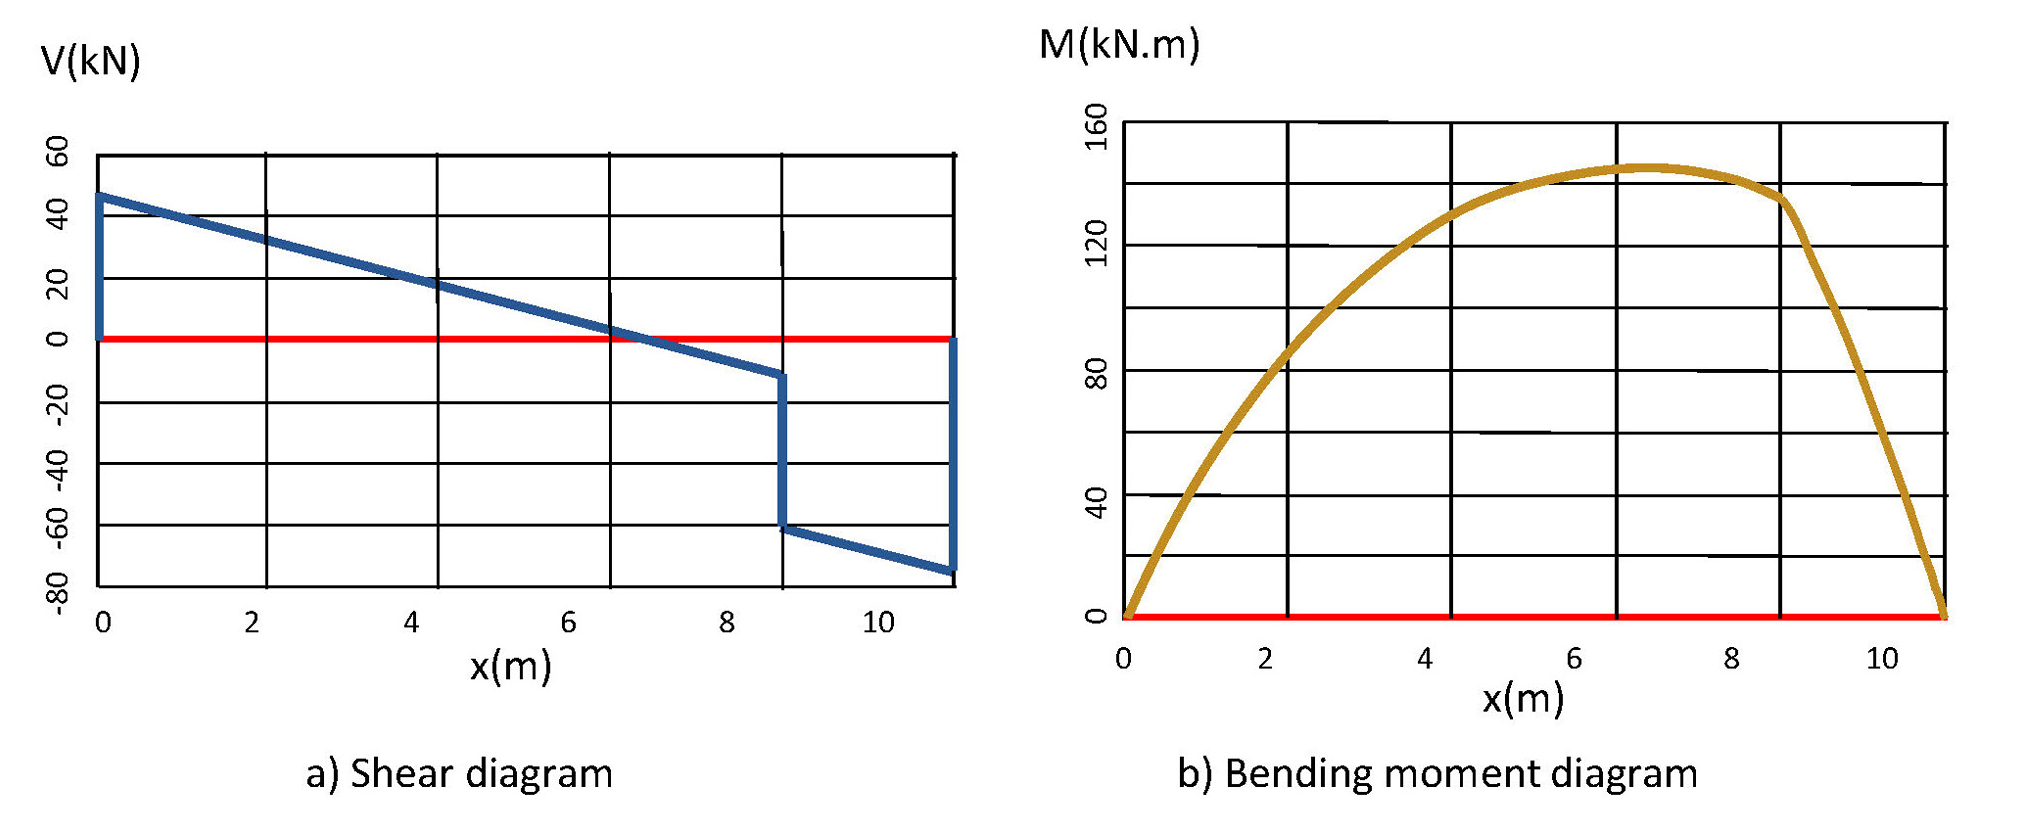 Shear and bending moment diagrams generated using the manual calculations results. 